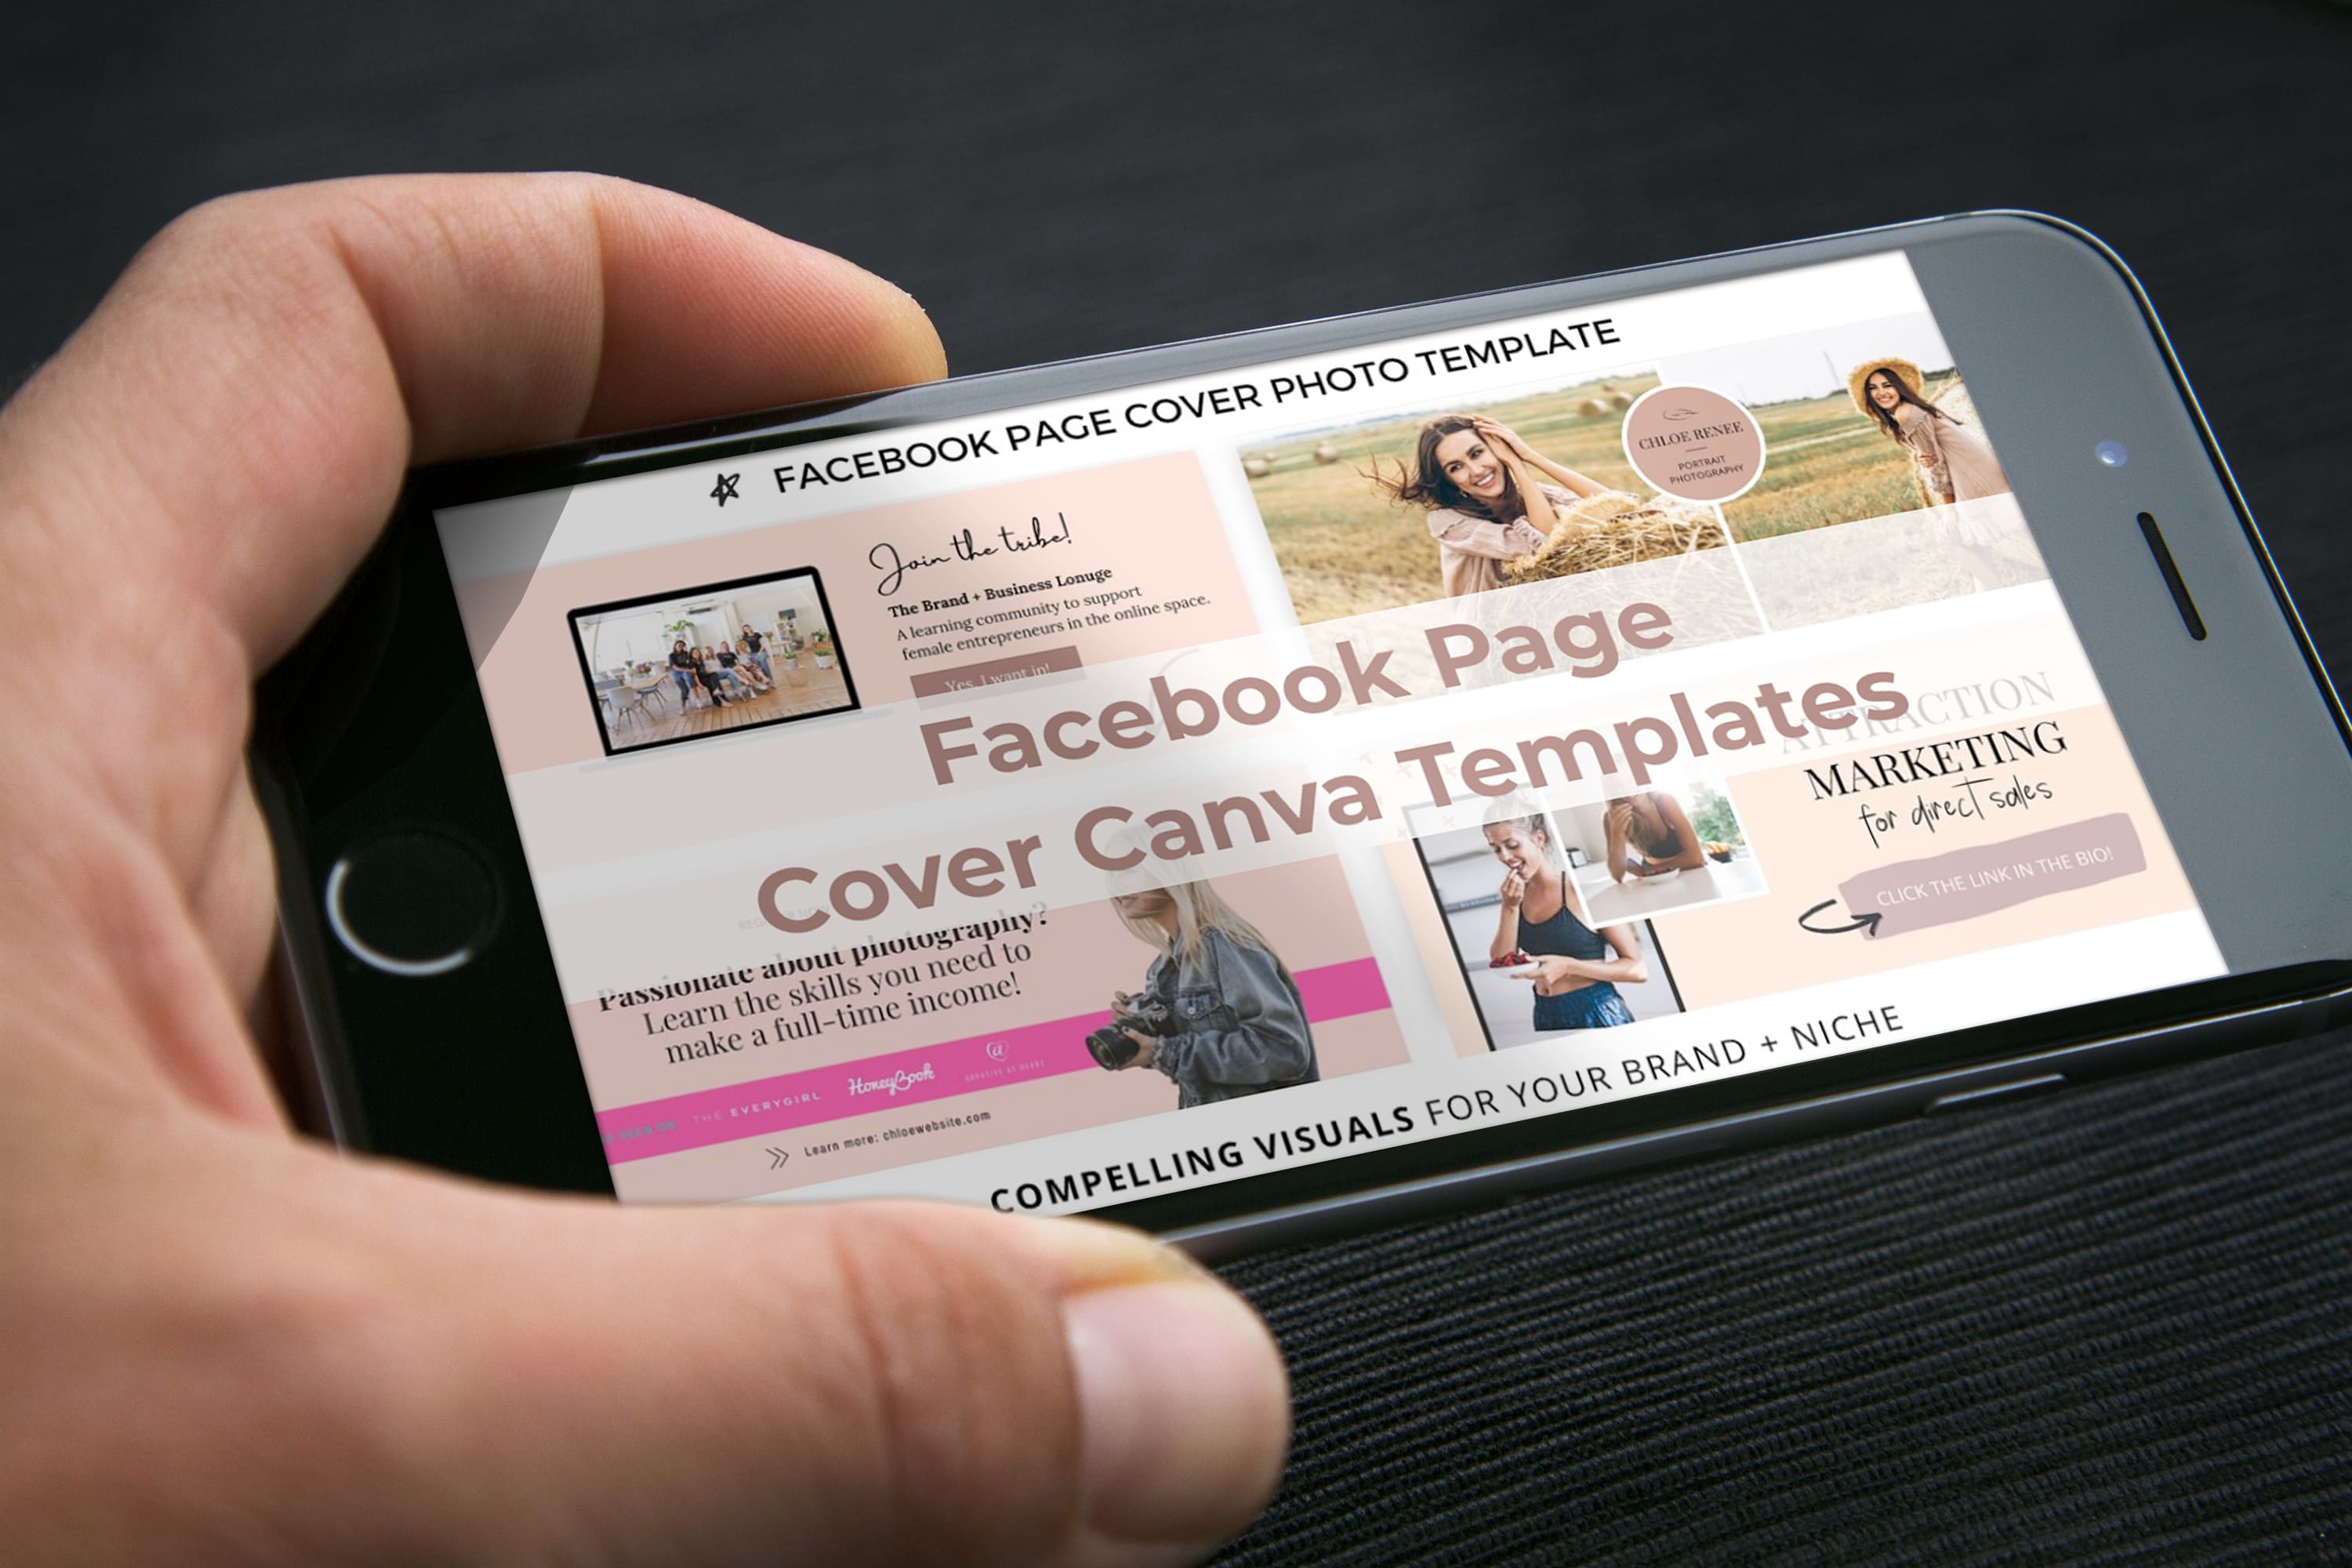 Mobile option of the Facebook Page Cover Canva Templates.